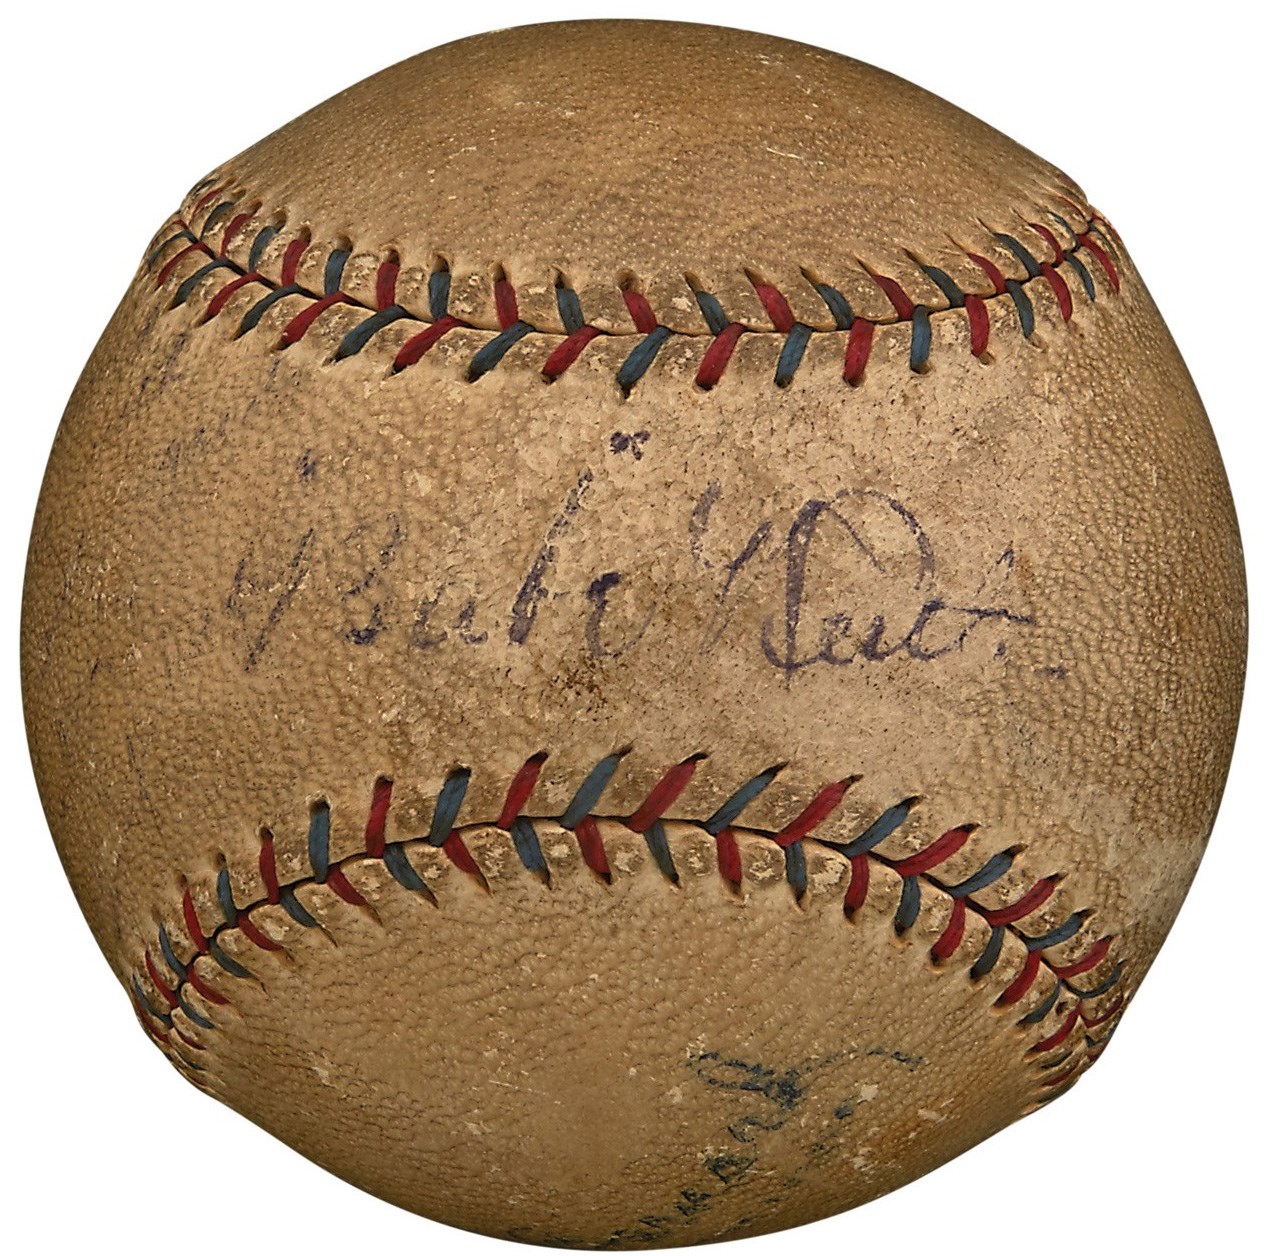 Ruth and Gehrig - 1928 Babe Ruth and Lou Gehrig Dual-Signed Reach Baseball (PSA)